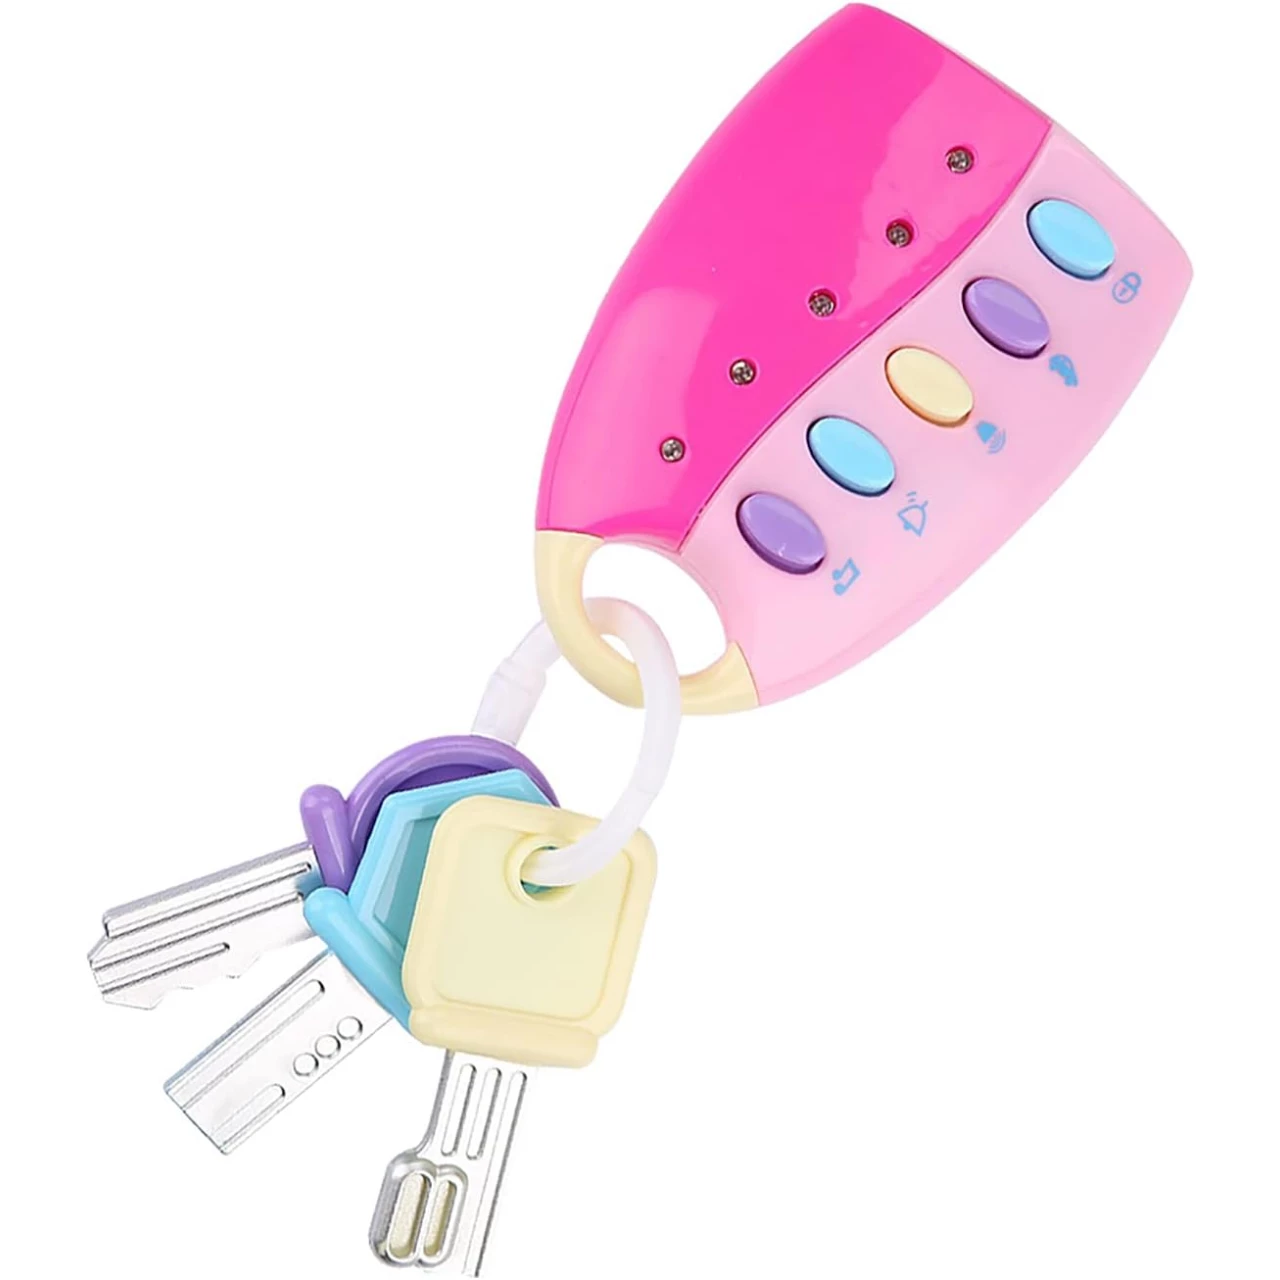 Vbestlife Funky Toy Keys for Toddlers and Babies, Baby Toy Smart Key Remote Car Control Musical Pretend Play for Kids Education Toys(Pink)